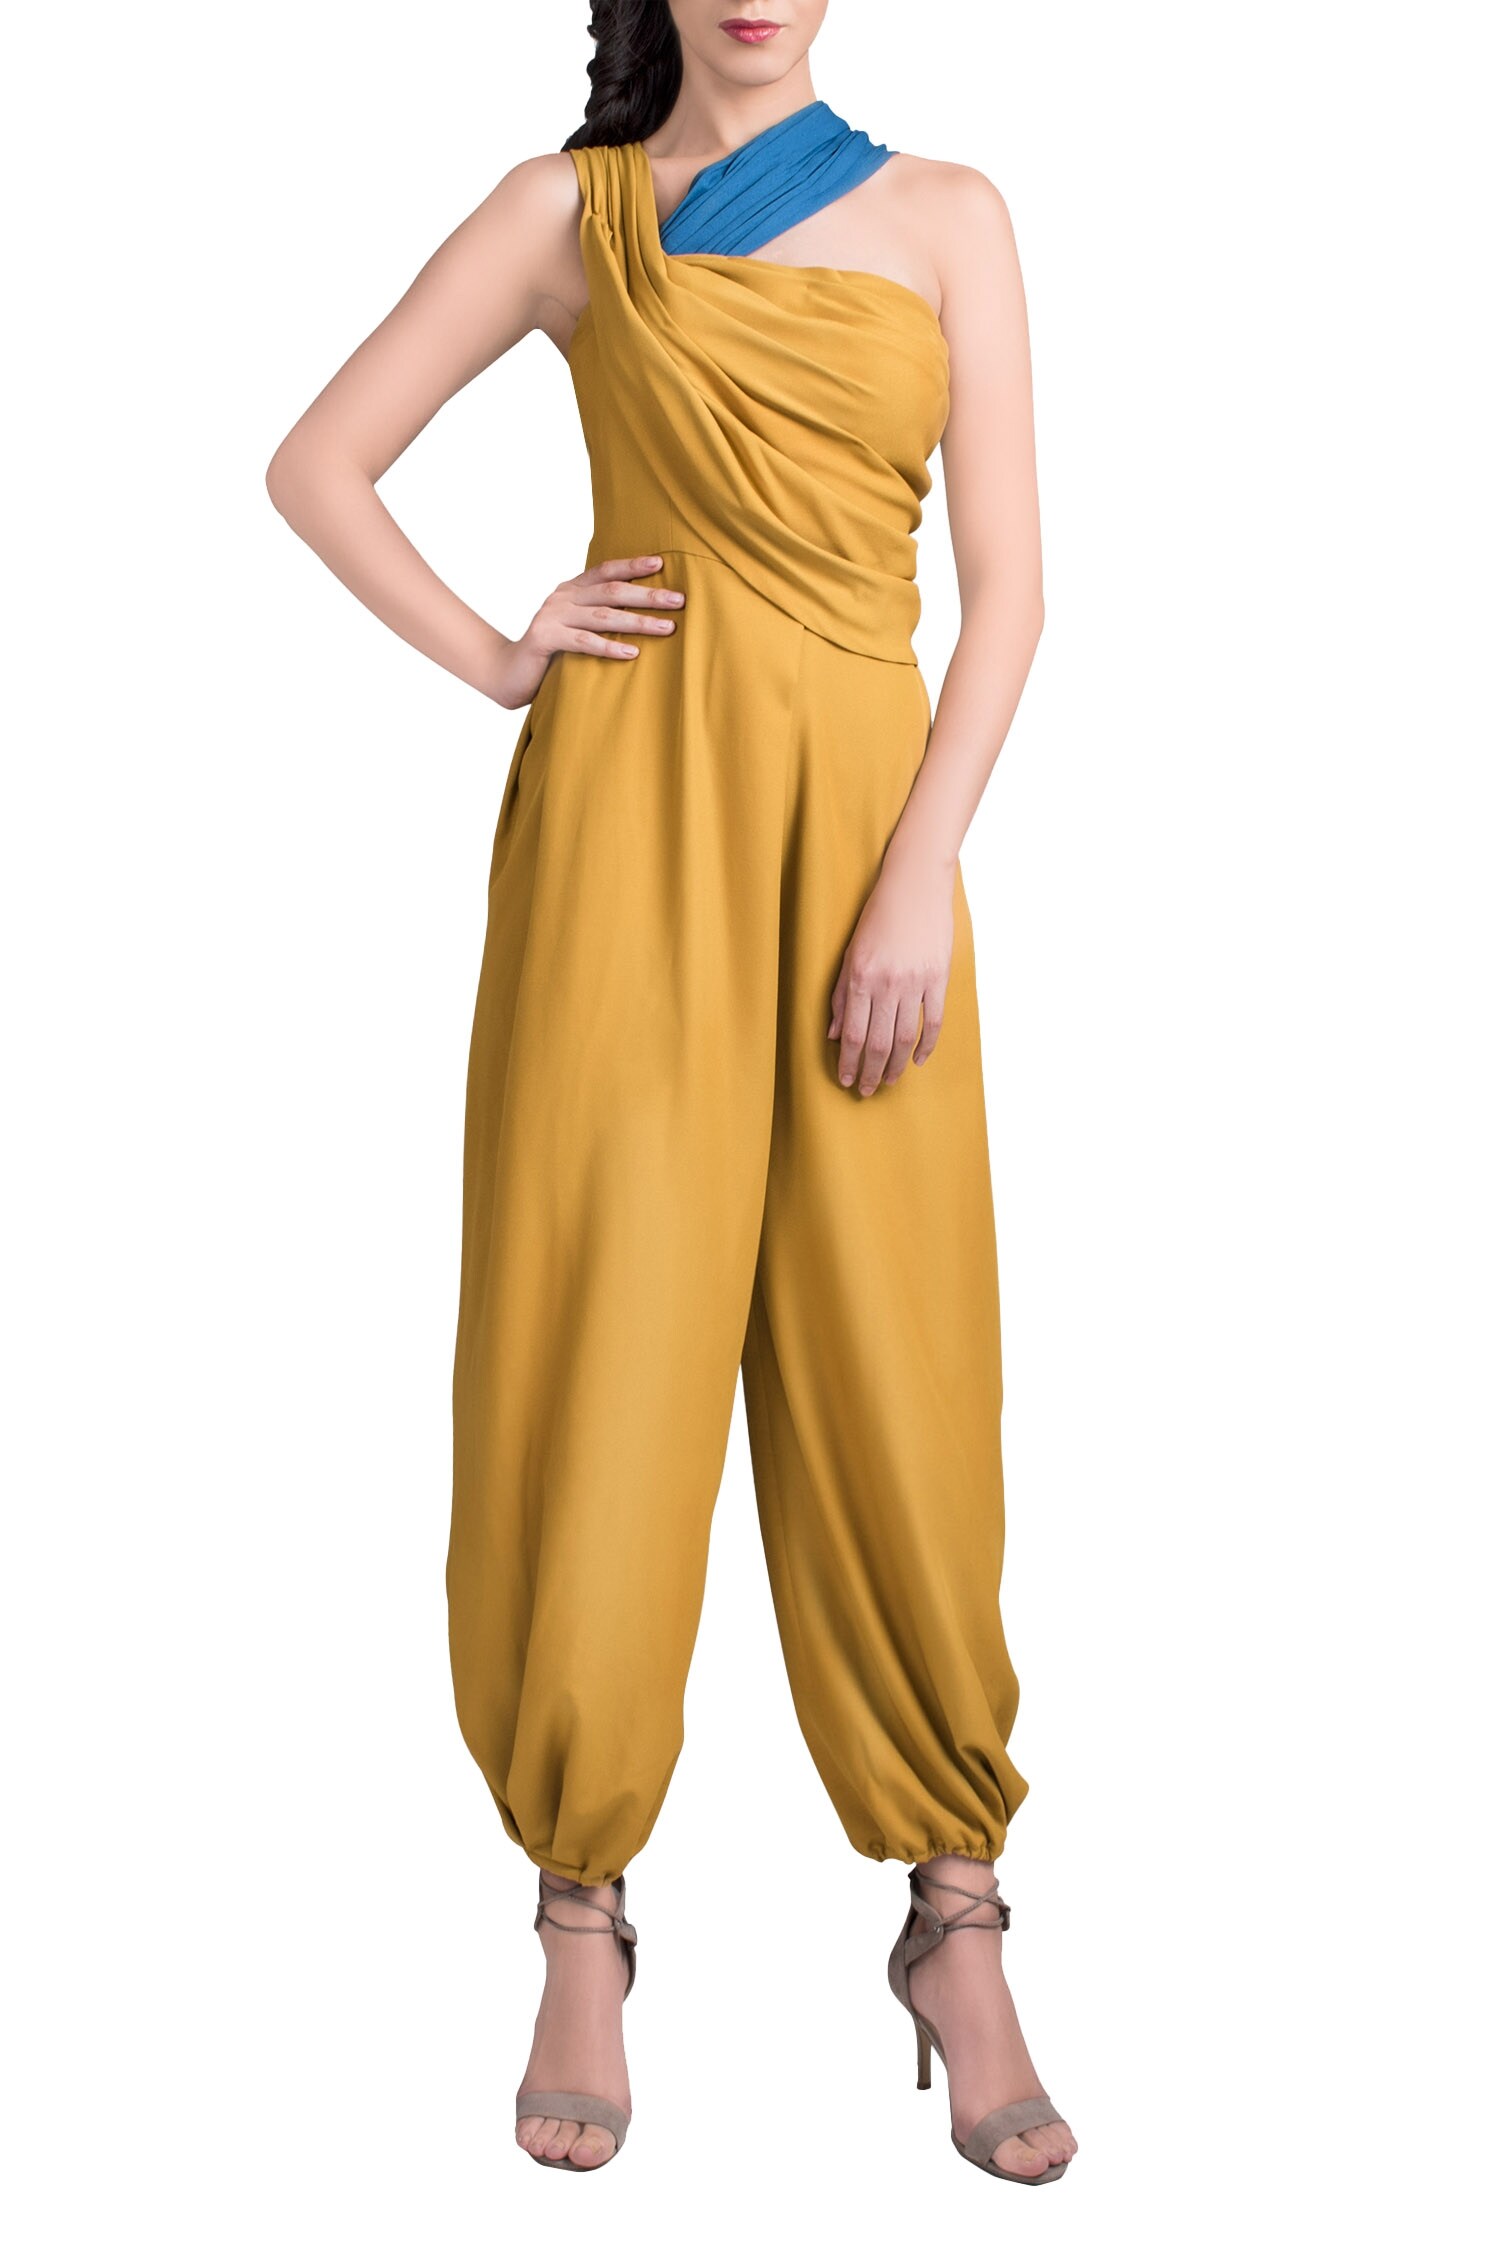 Buy Draped jumpsuit by Anome at Aza Fashions